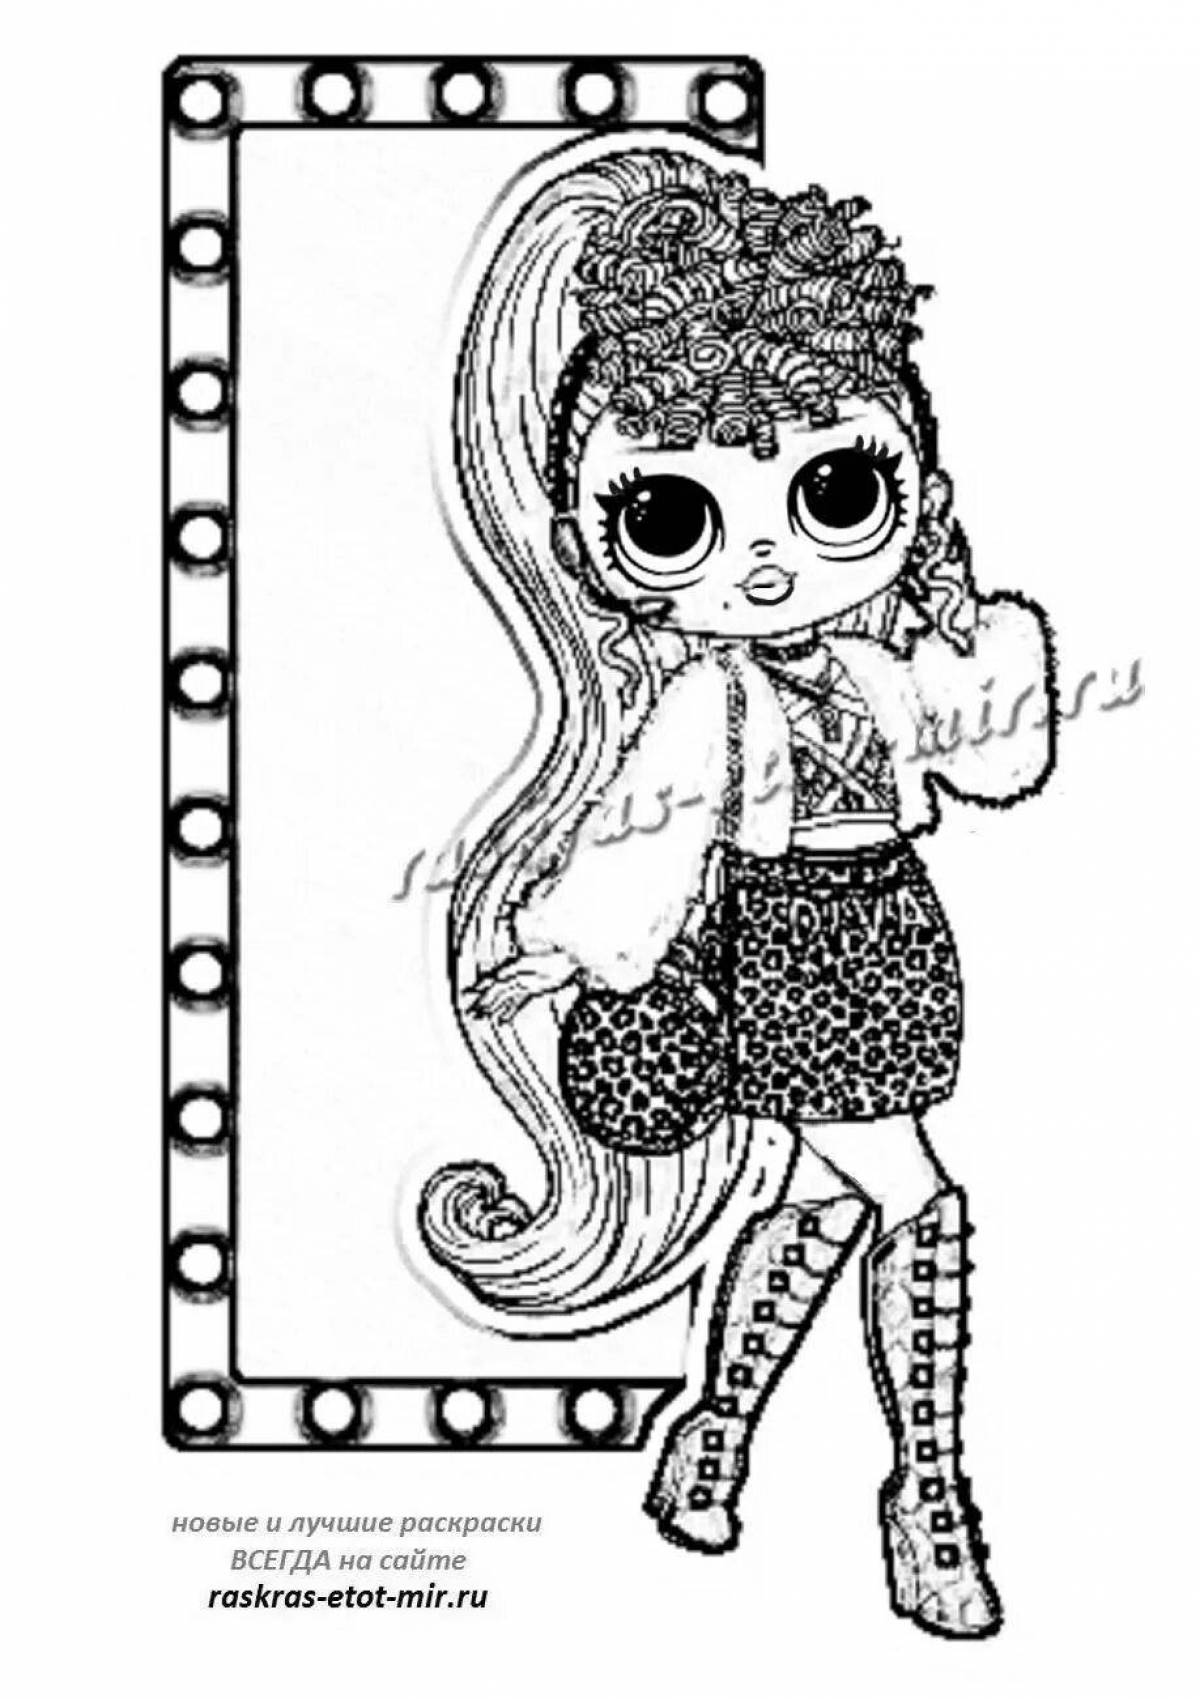 Omg dolls glitter coloring pages